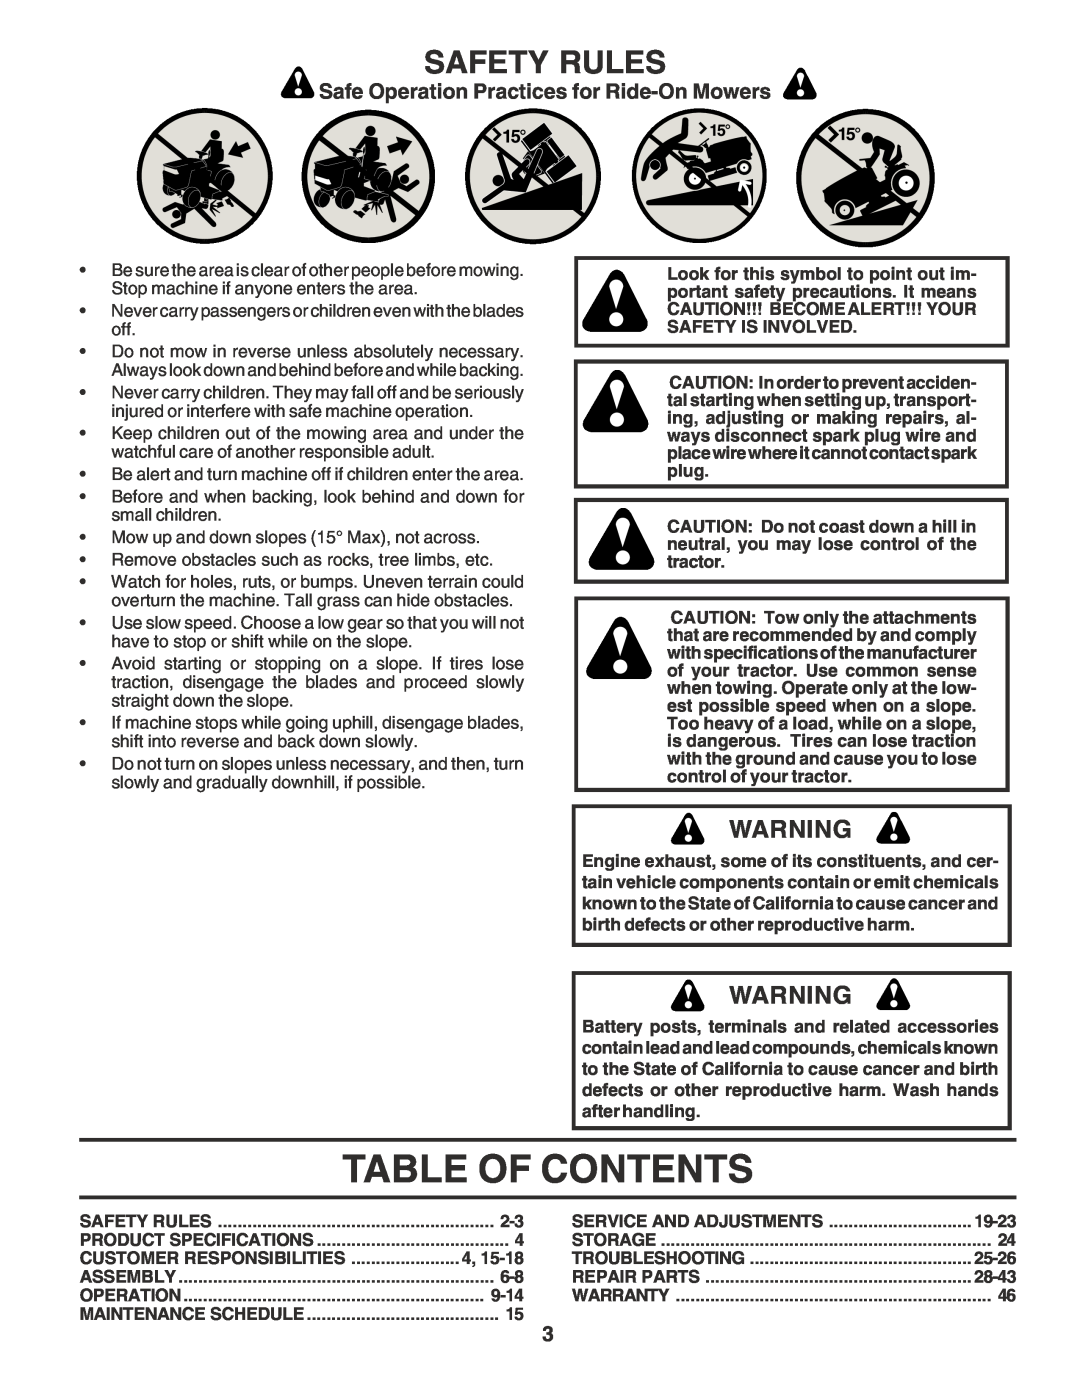 Poulan PR1842STD Table Of Contents, Safety Rules, Safe Operation Practices for Ride-On Mowers, 9-14, 19-23, 25-26, 28-43 